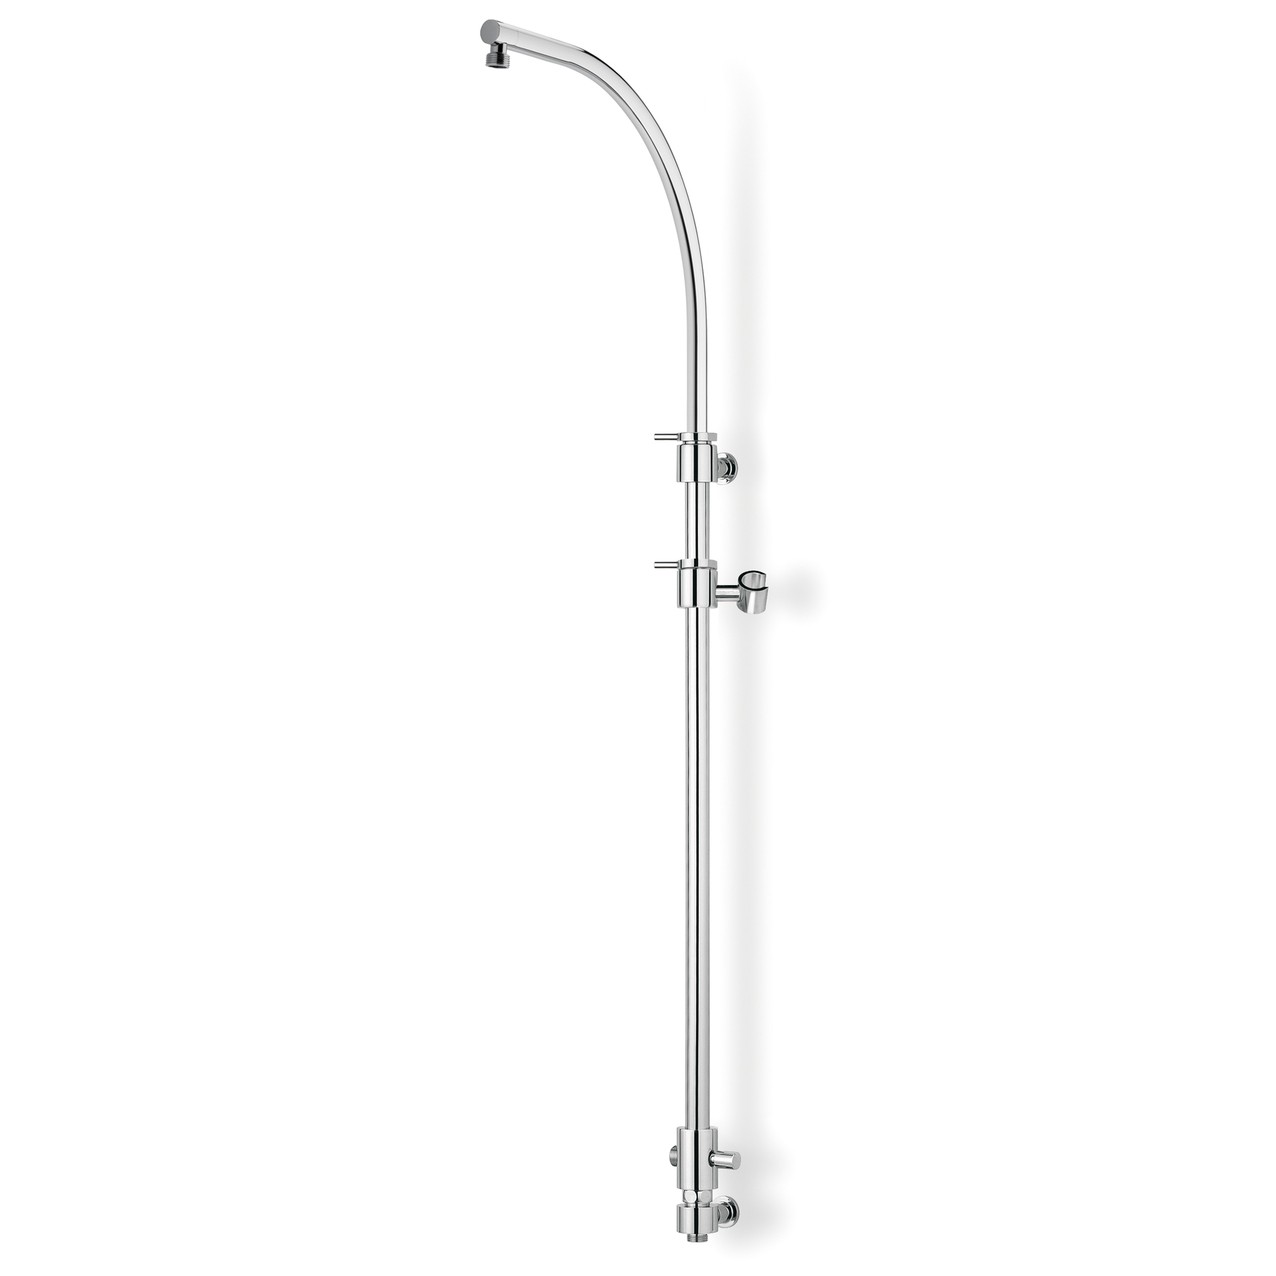 Bow-shaped shower column with sliding bar